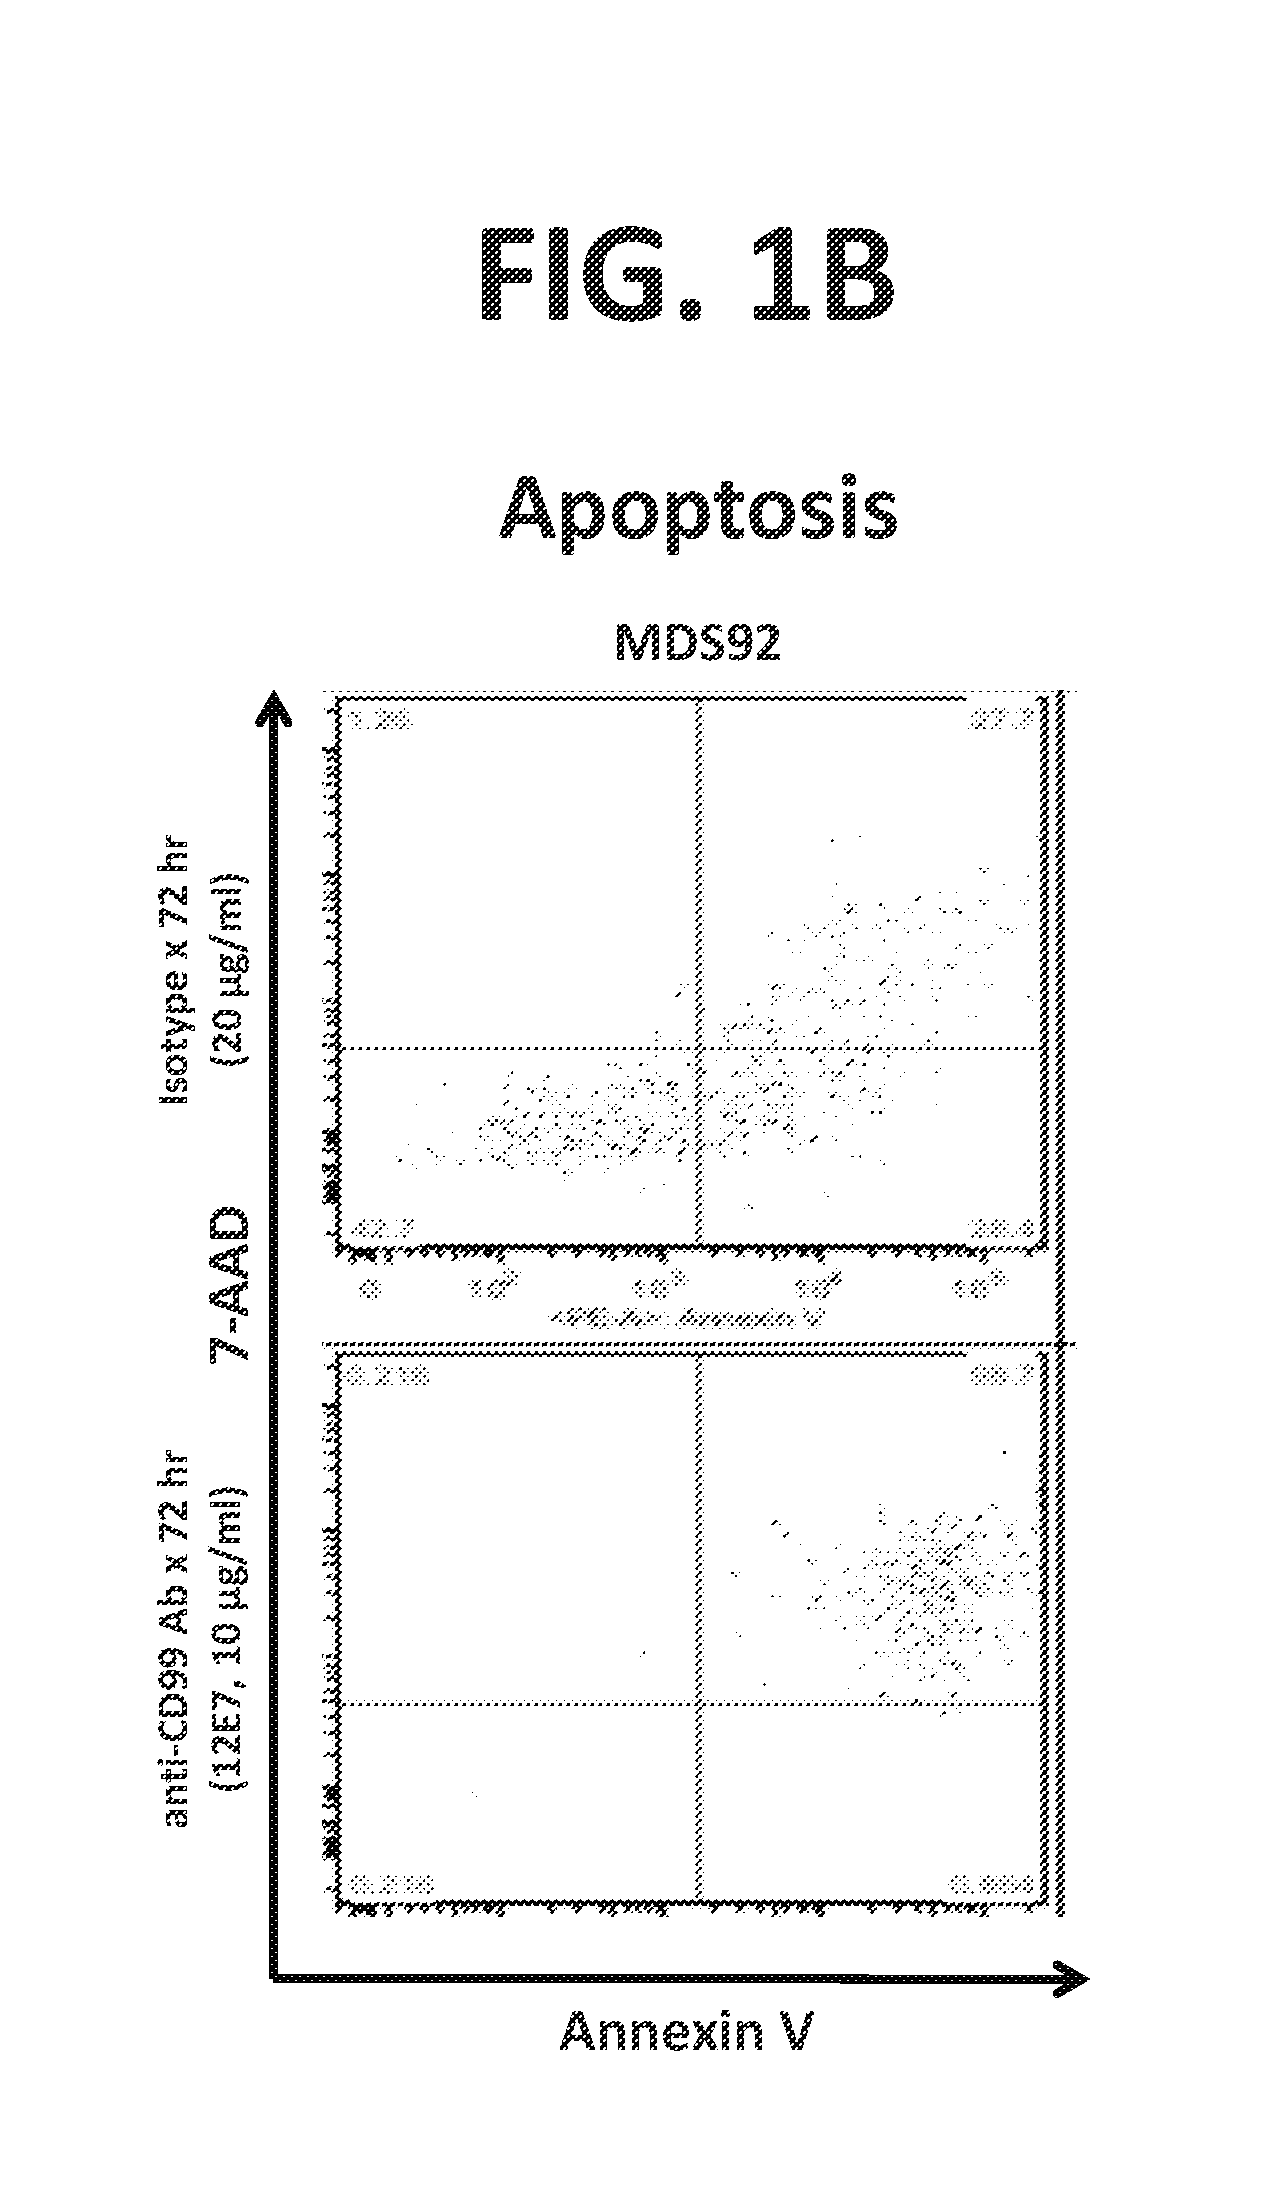 Compositions and Methods for the Treatment of Acute Myeloid Leukemias and Myelodysplastic Syndromes